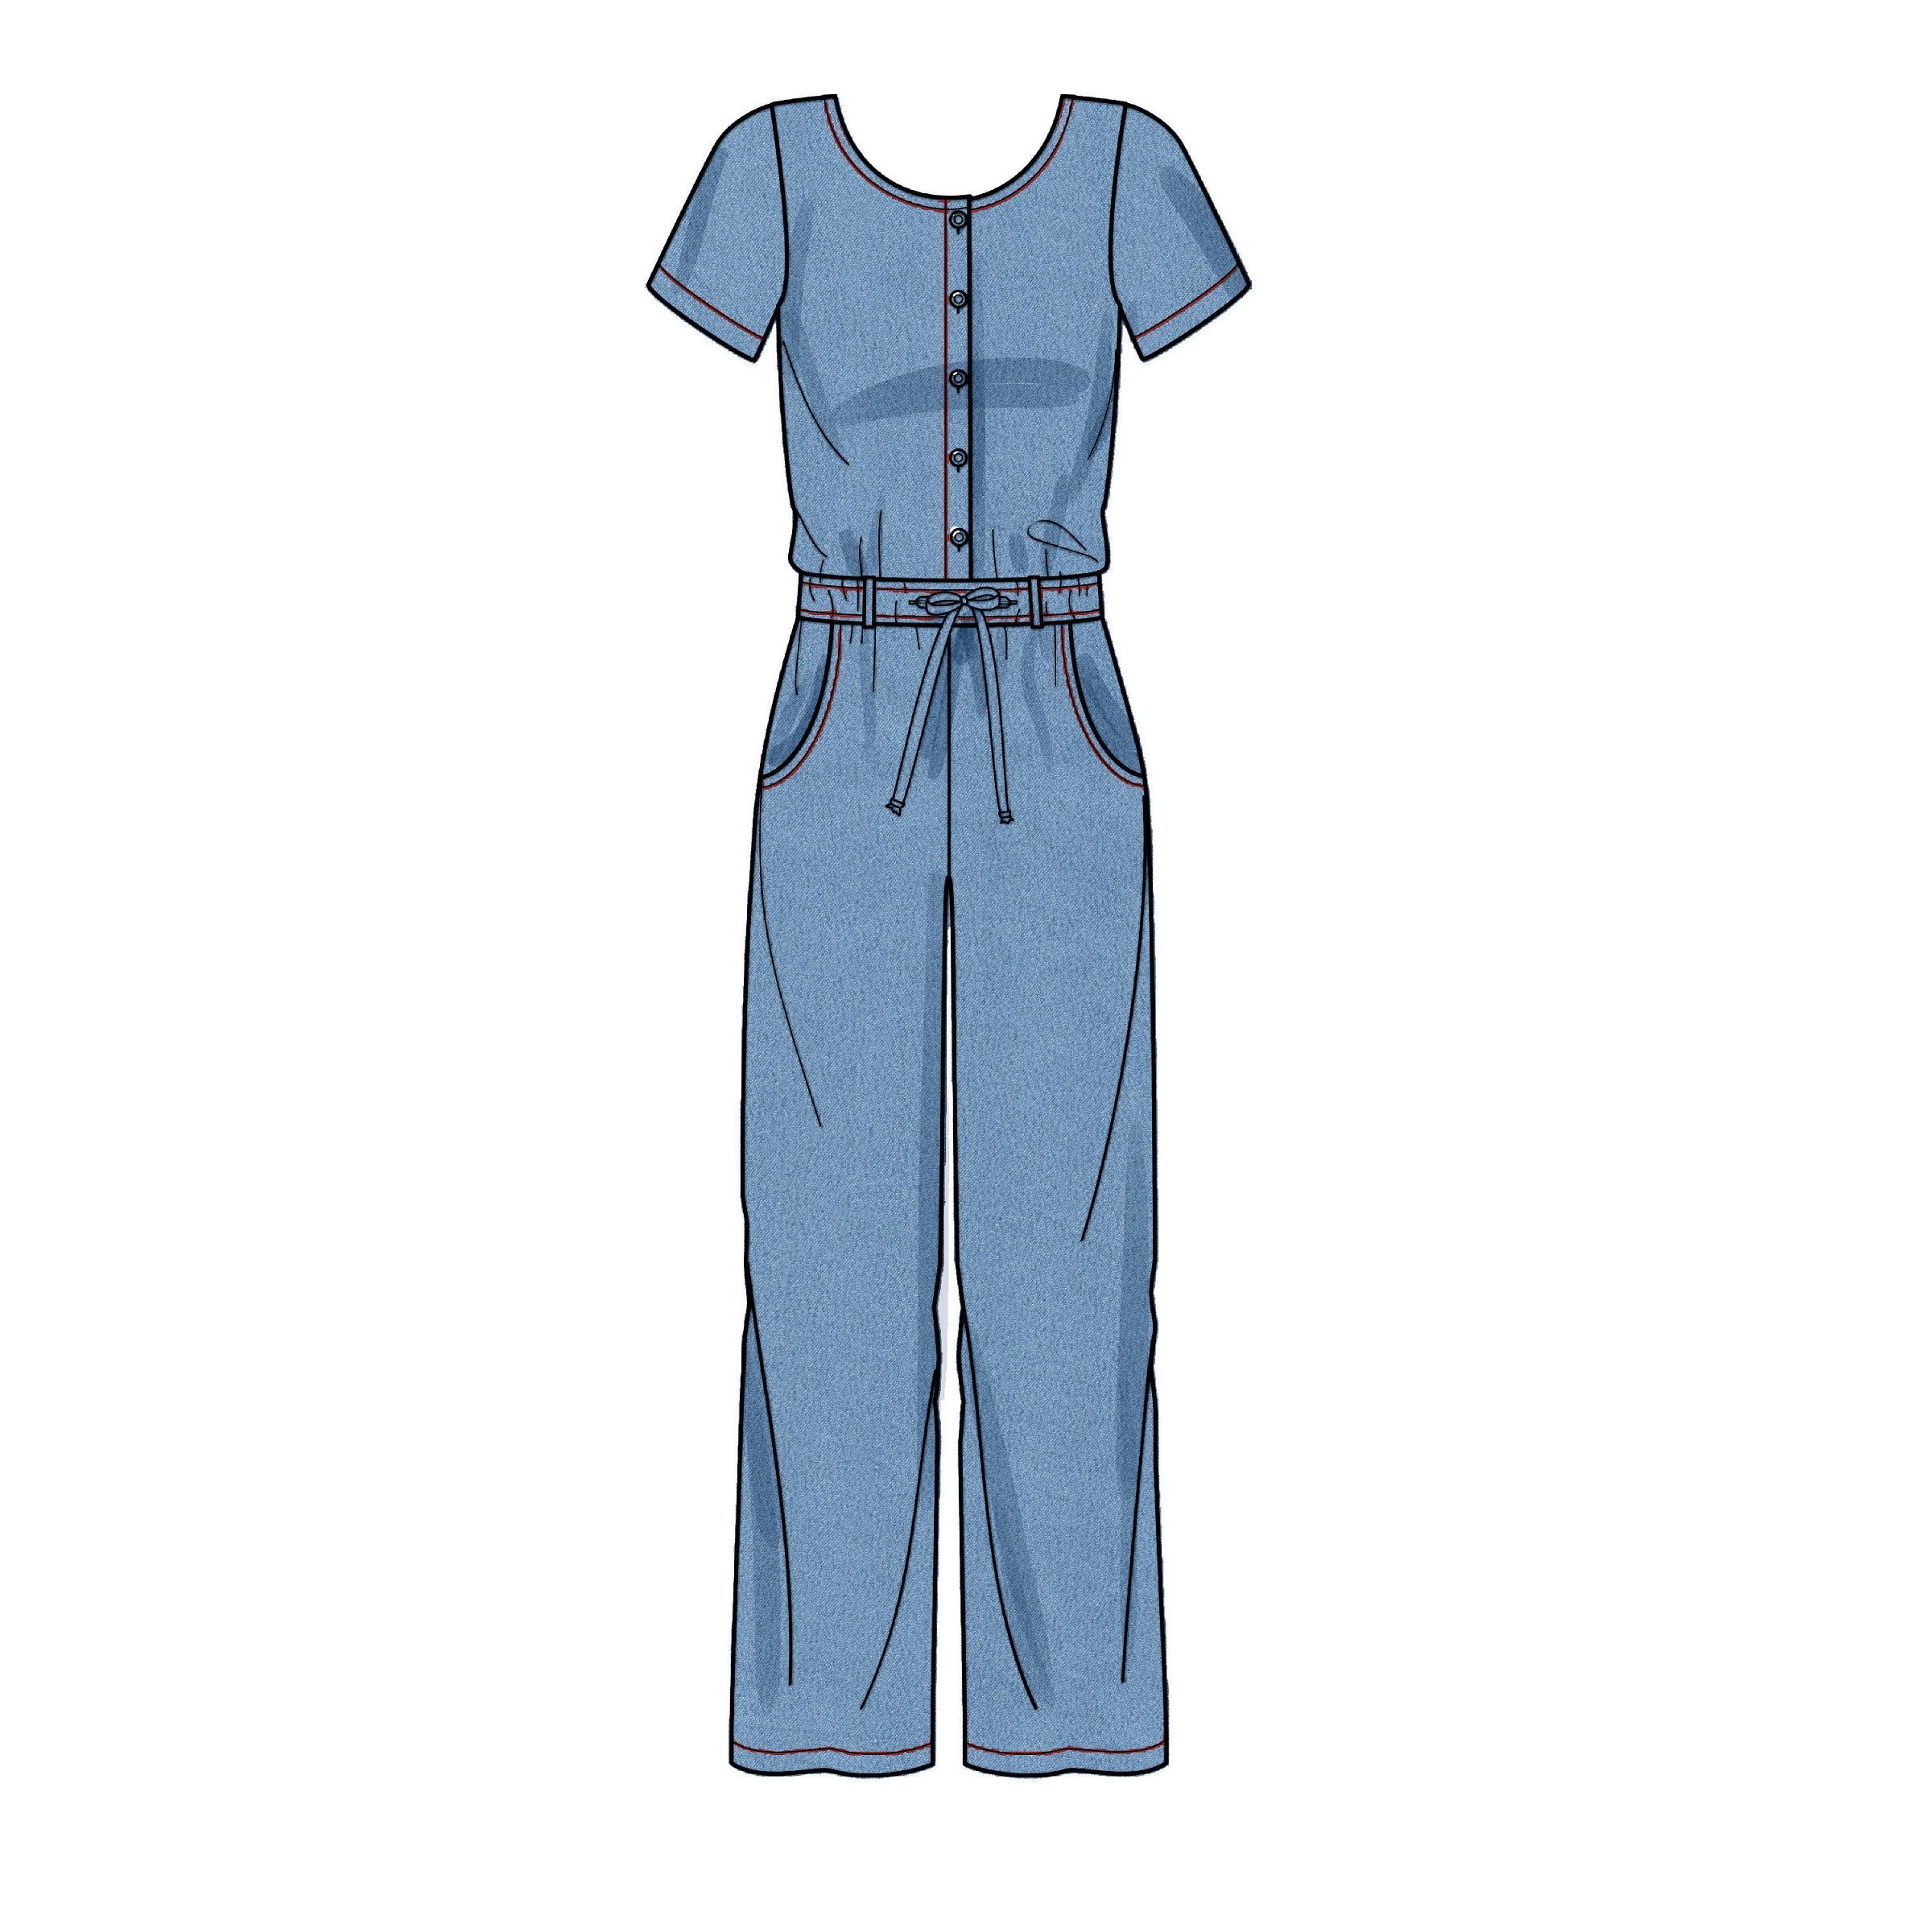 New Look Sewing Pattern 6661  Relaxed Fit Jumpsuit from Jaycotts Sewing Supplies